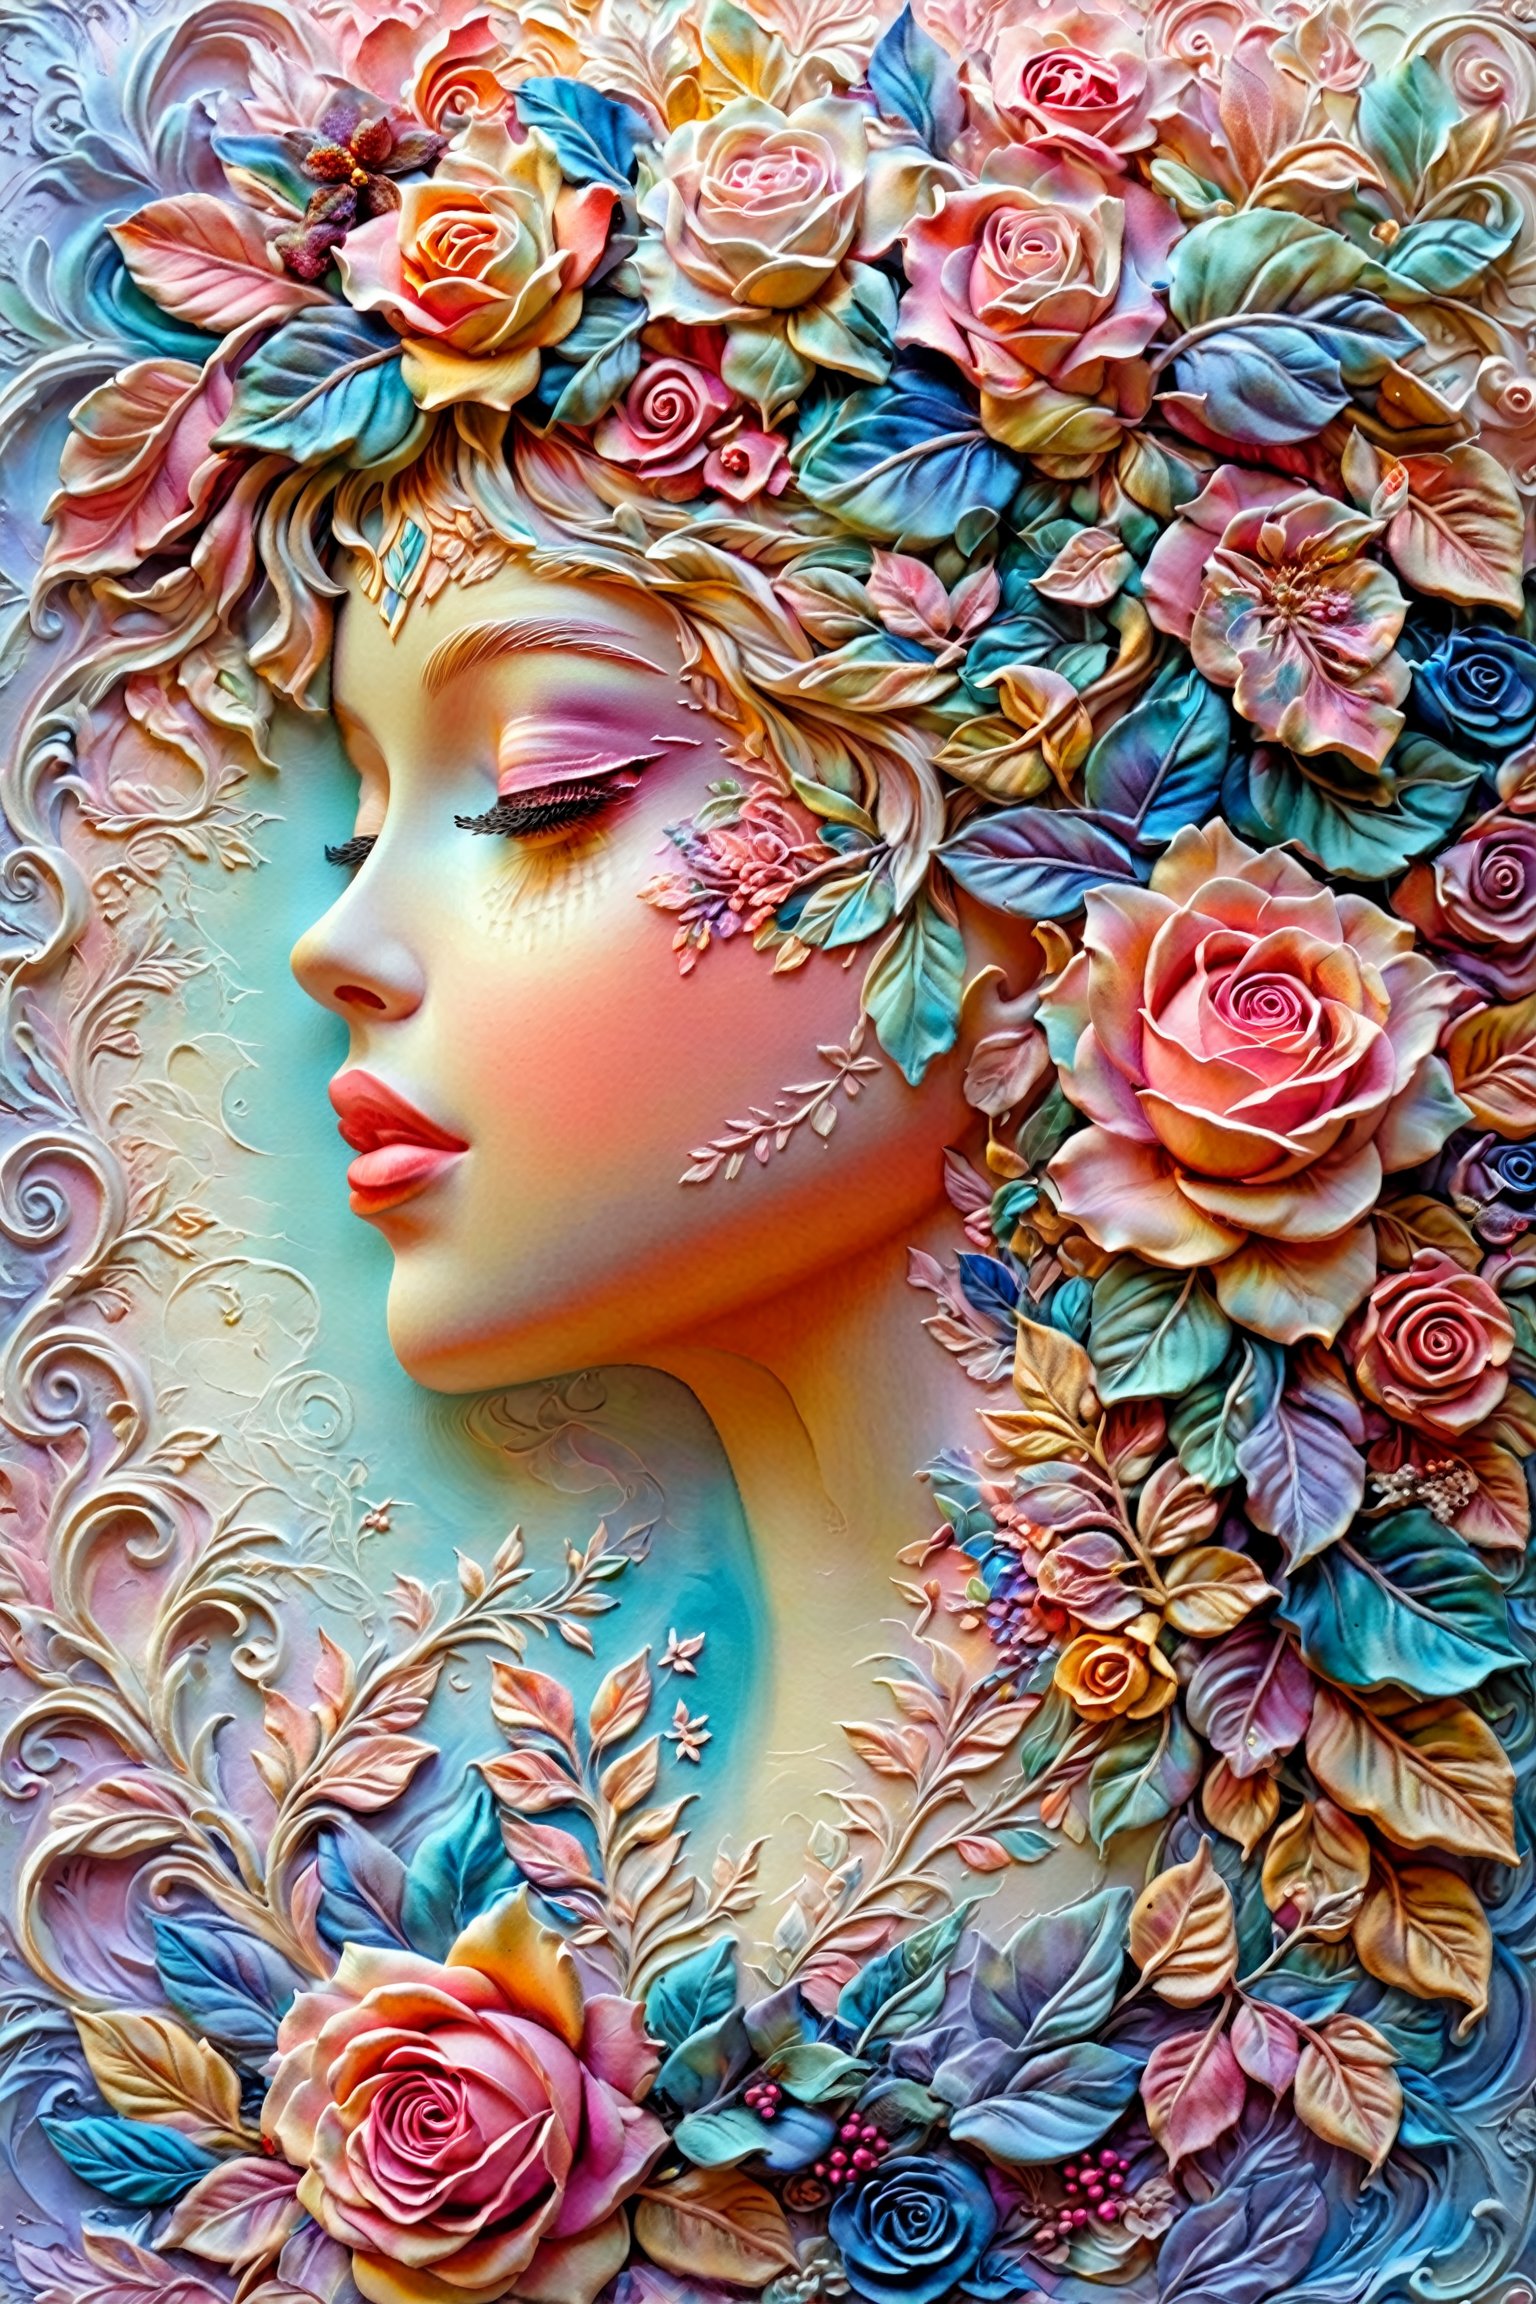 A side profile of a female face adorned with an intricate arrangement of flowers and leaves. The face is painted in soft pastel shades, with the most prominent feature being a large rose in the center of her hair. The background is a blend of pastel colors, with swirling patterns and more floral motifs. The overall artwork exudes a dreamy, ethereal vibe, blending the boundaries between nature and human beauty.